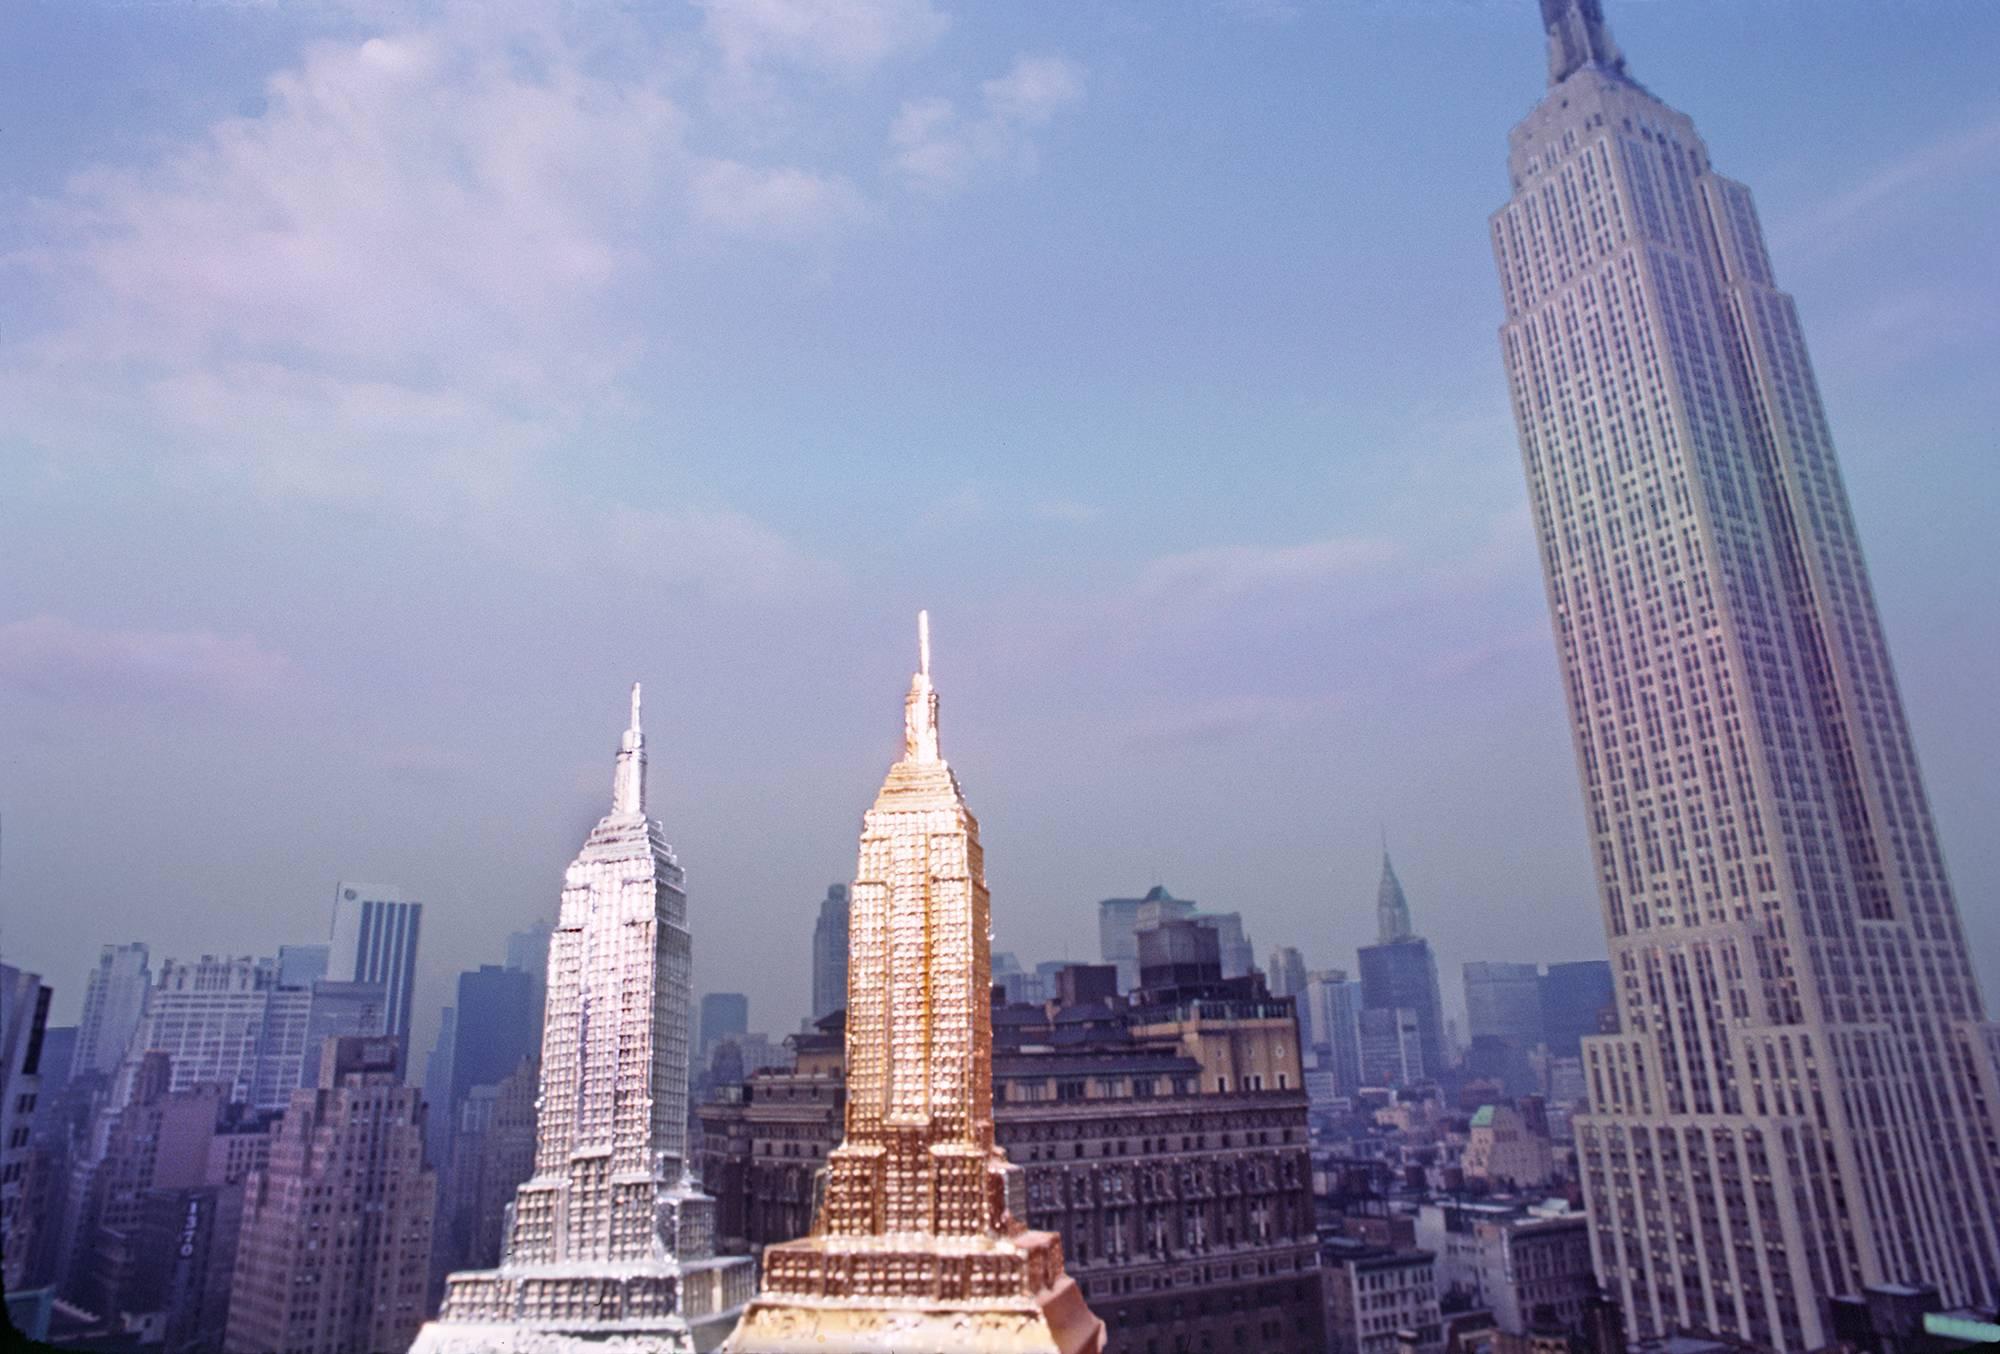 Robert Funk Color Photograph - Three Empire State Buildings